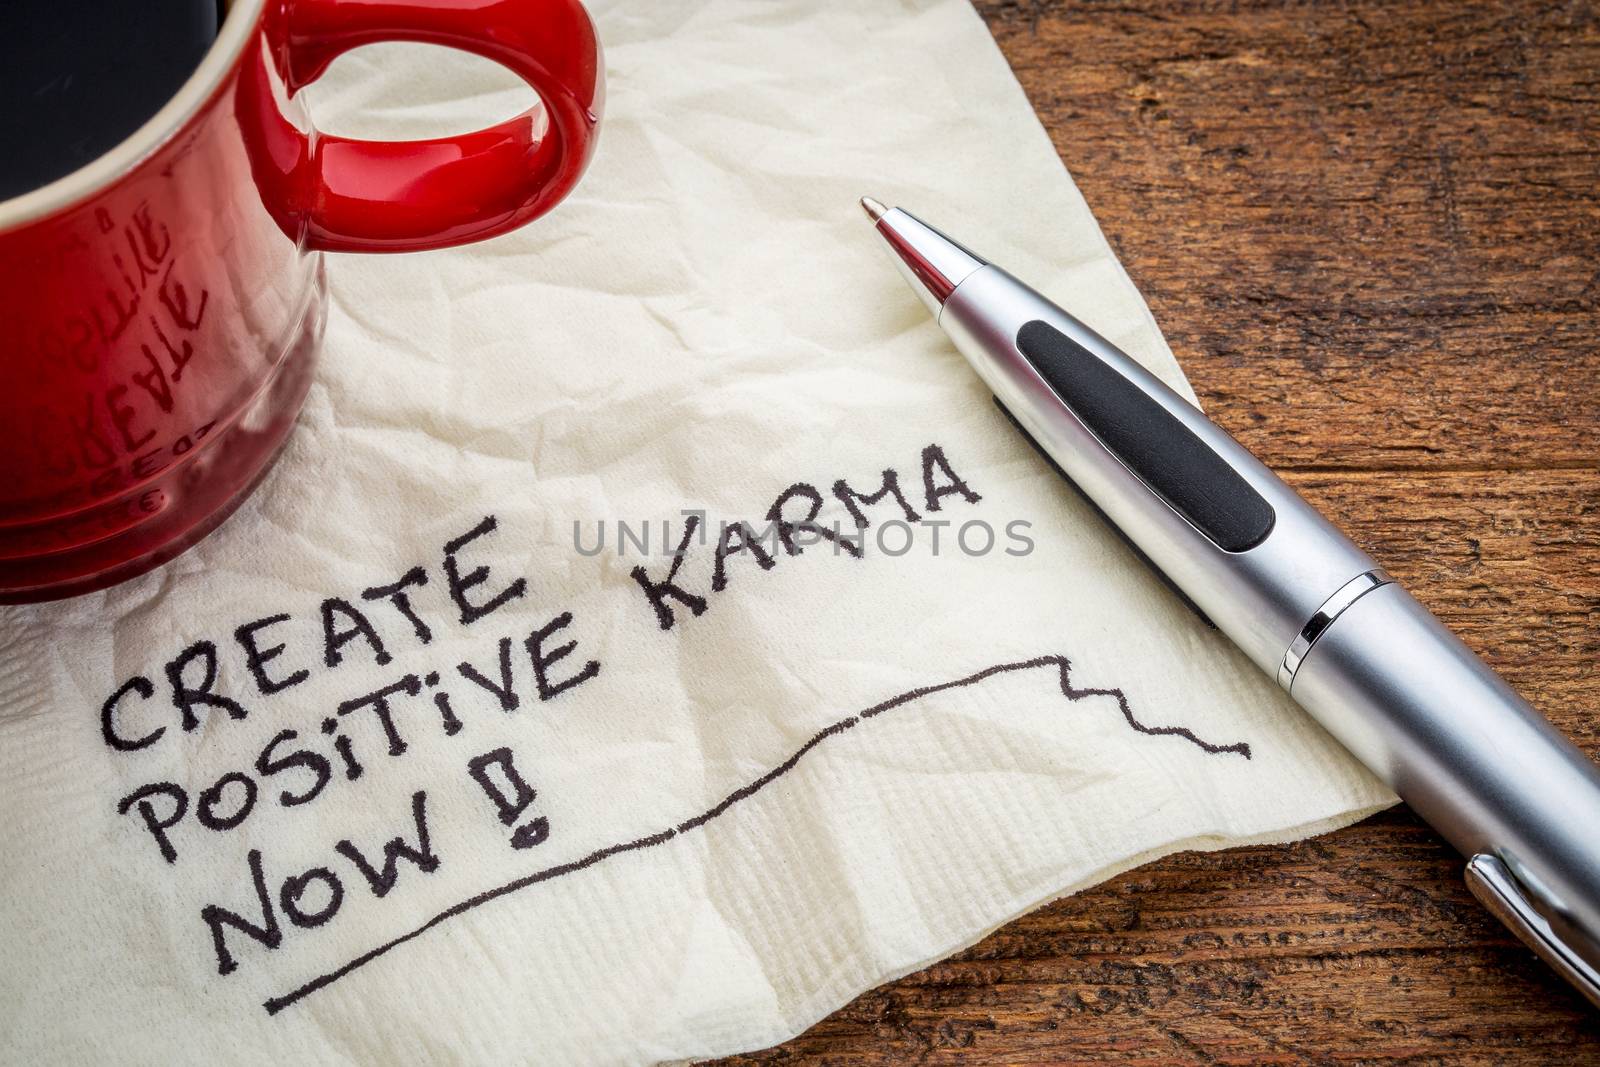 create positive karma now - motivational handwriting on a napkin with cup of coffee